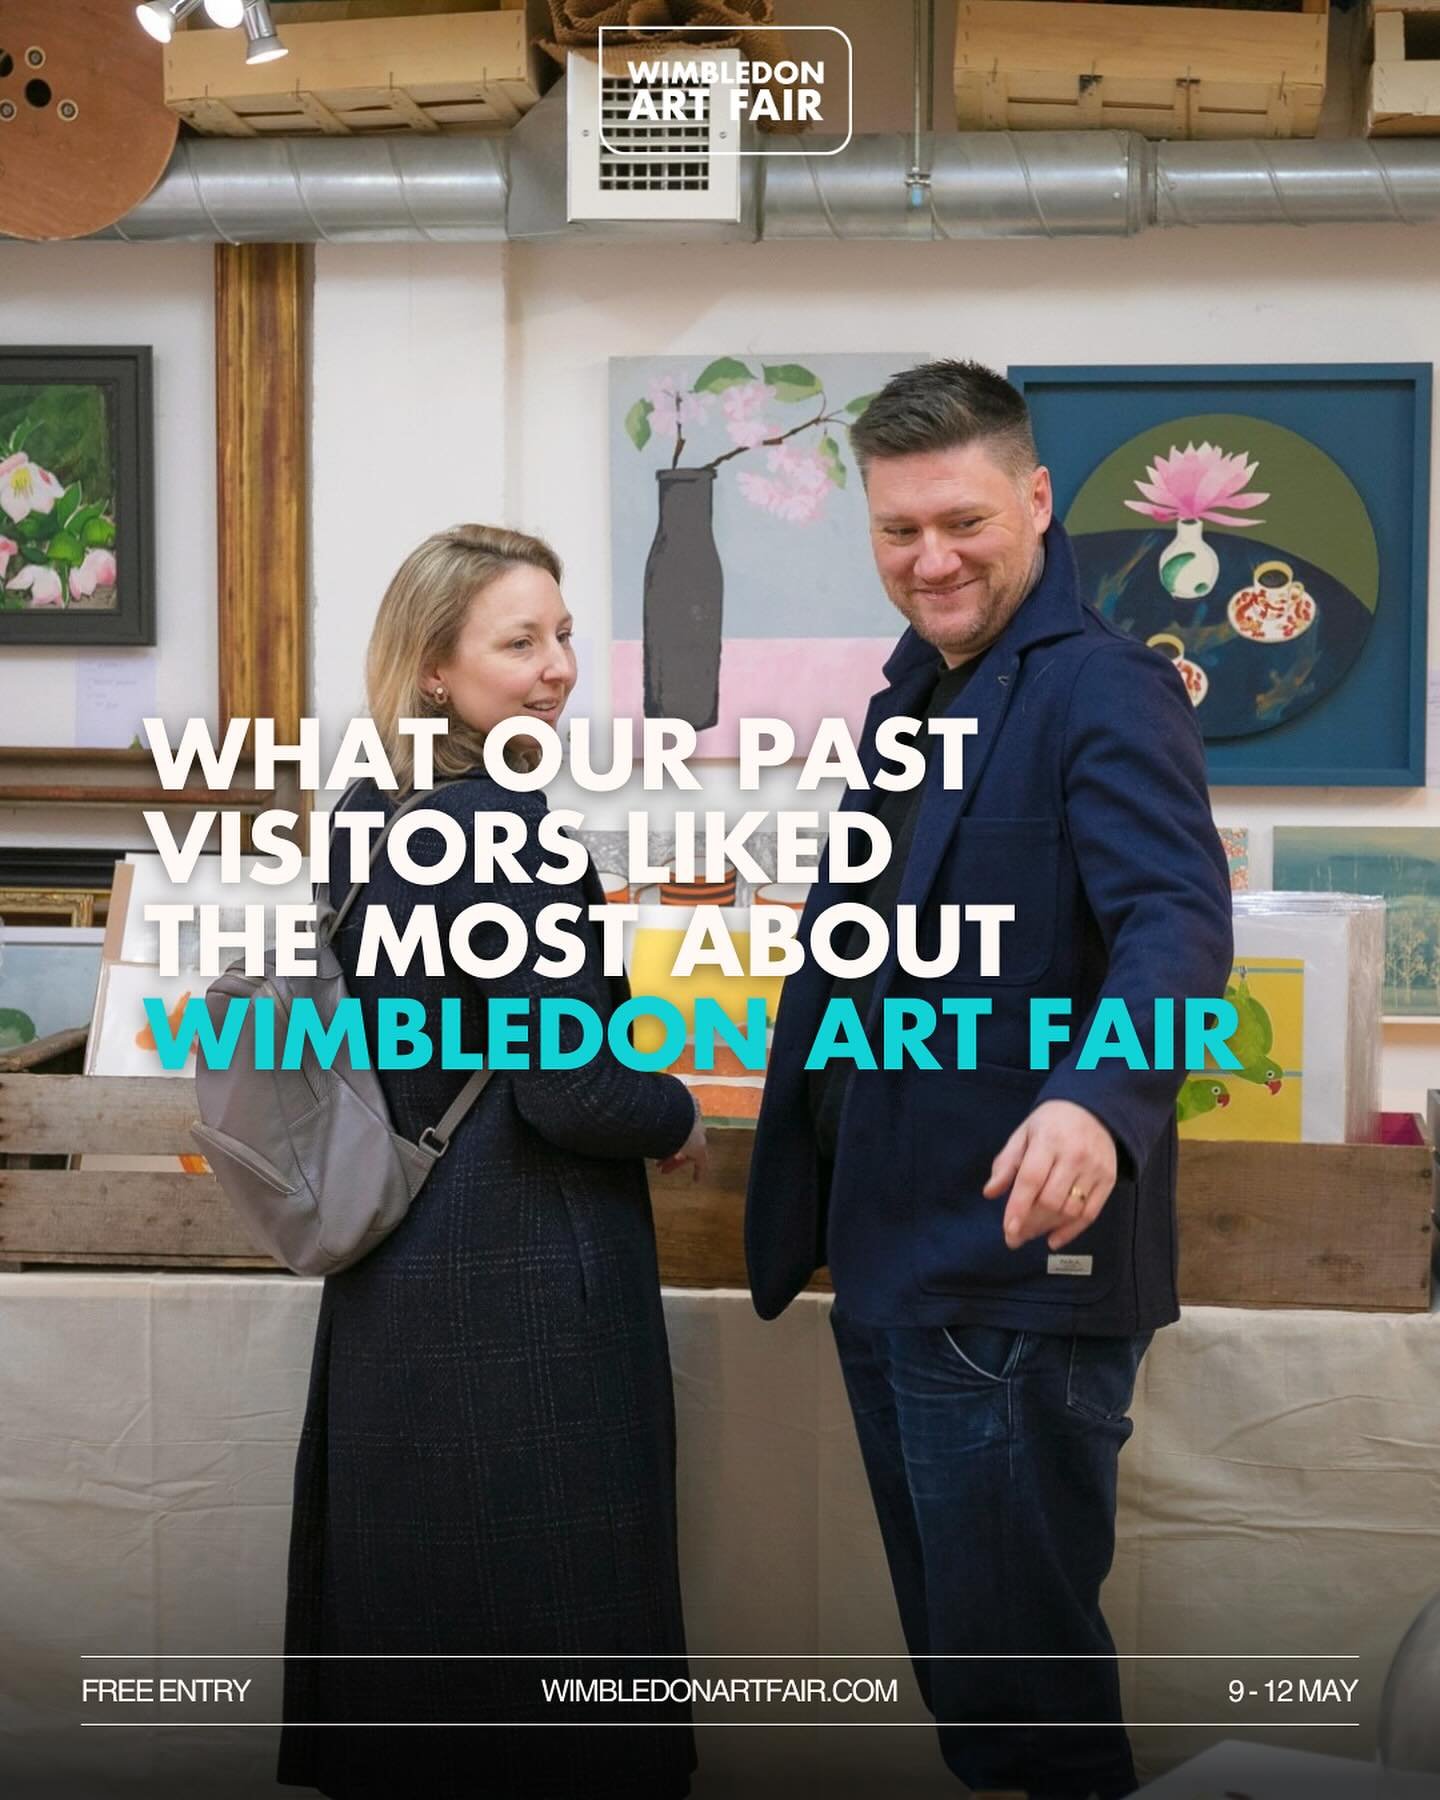 The people have spoken 🙌

Following the resounding success of our last #WimbledonArtFair, with record-breaking attendance, we asked our fantastic visitors to share what stood out the most for them during their visit... and the feedback was unanimous